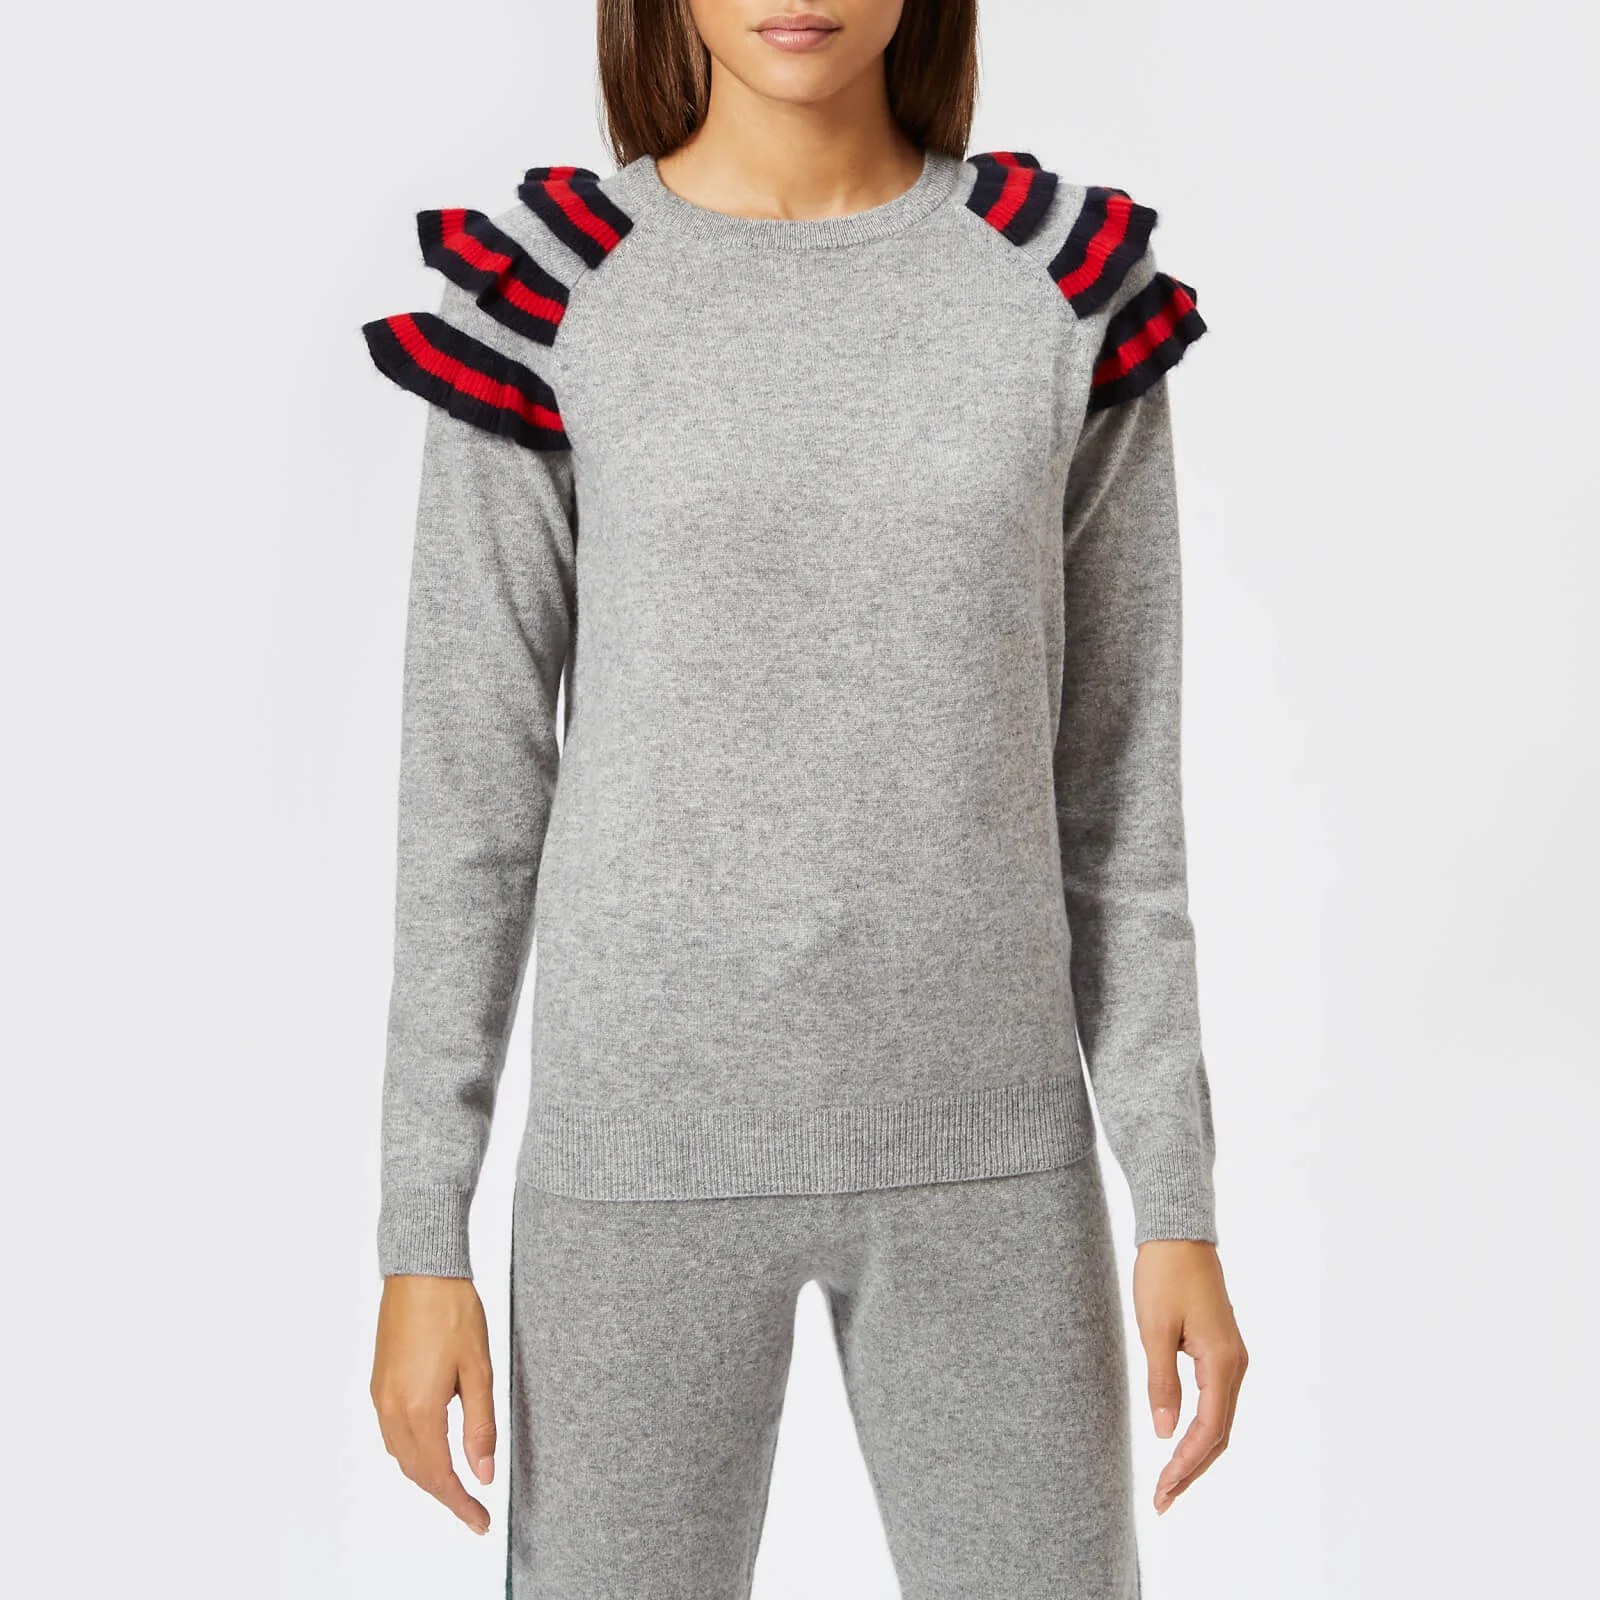 Madeleine Thompson Women's Dia Frill Knit Jumper - Grey & Red Image 1